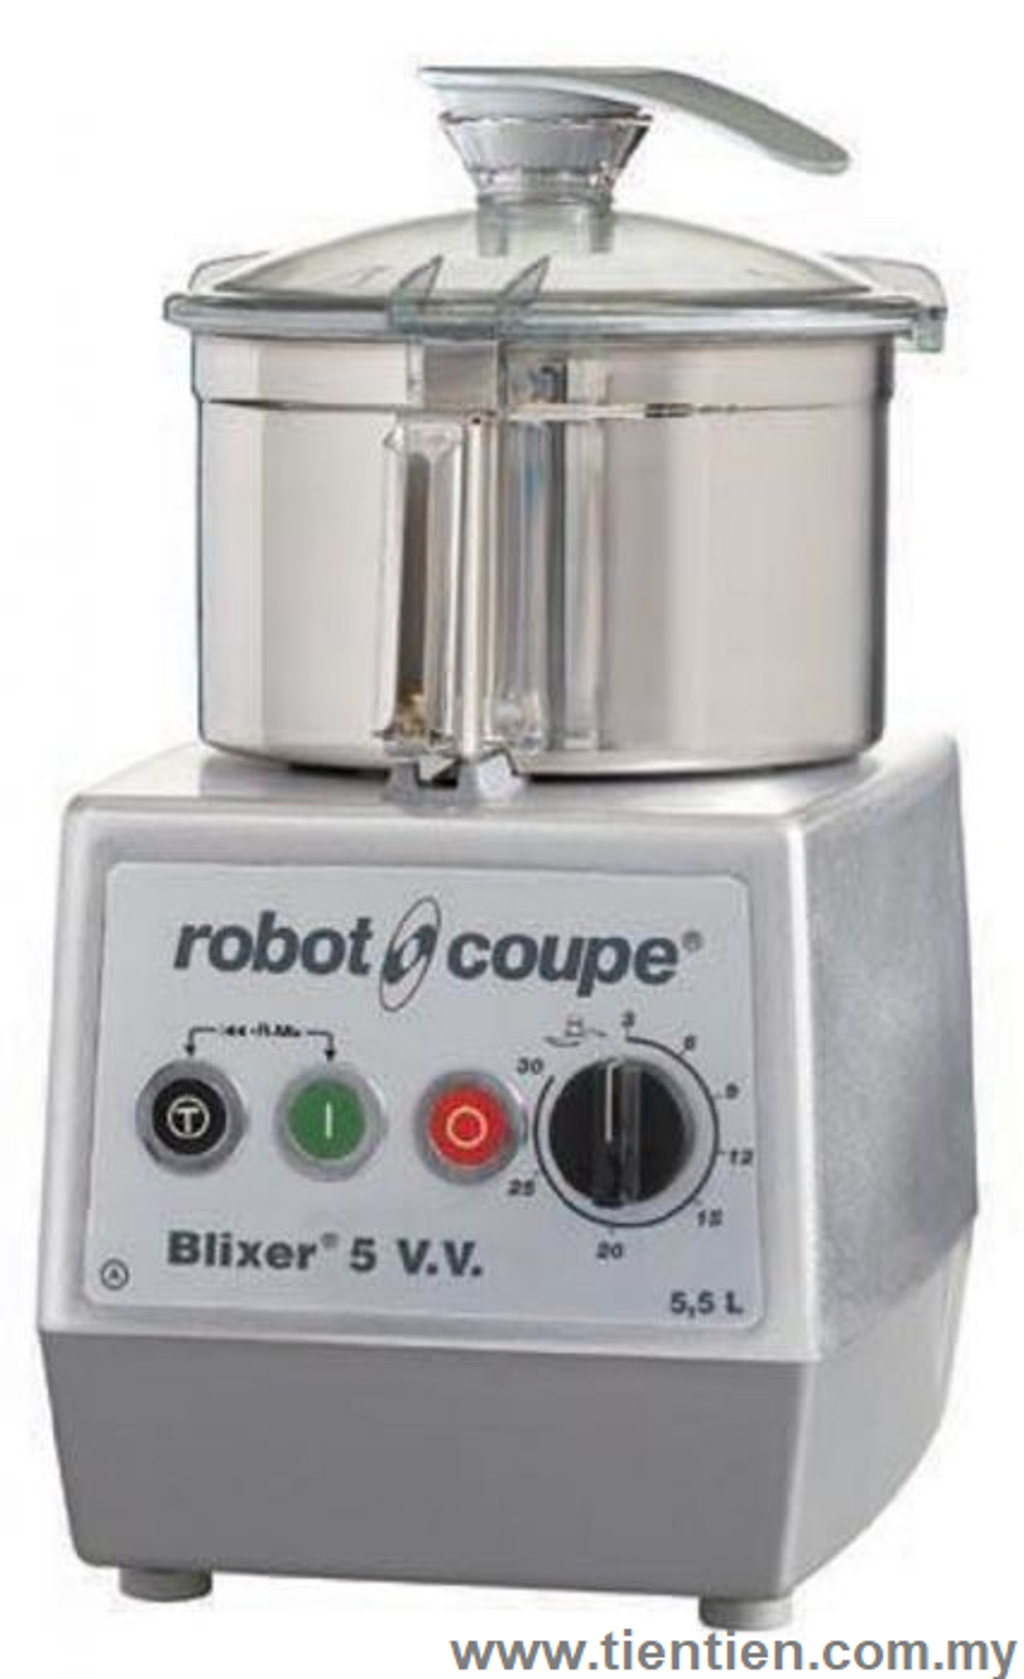 robot-coupe-5.5l-blender-mixer-emulsifier-variable-speed-blixer5vv-tientien-malaysia.png